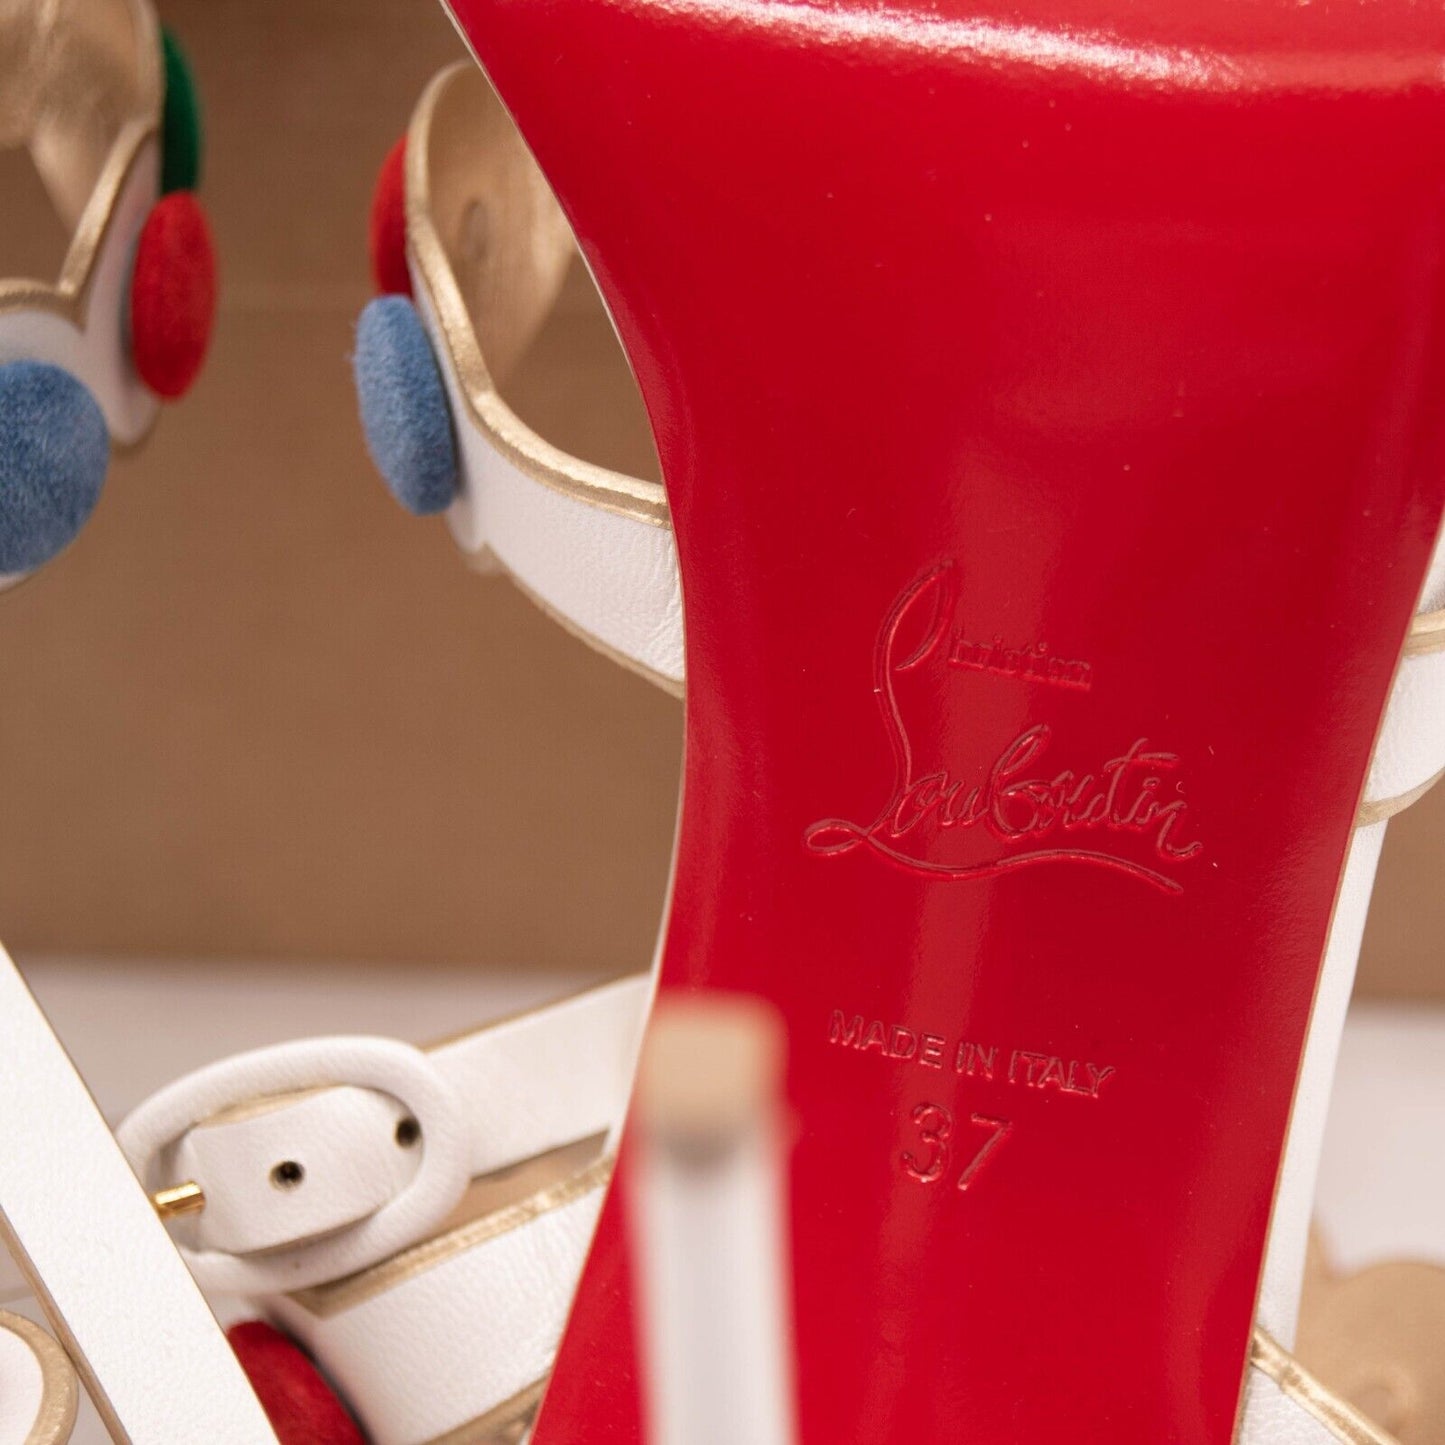 NEW Christian Louboutin White Smartissima 100 Suede-trimmed Leather Sandals